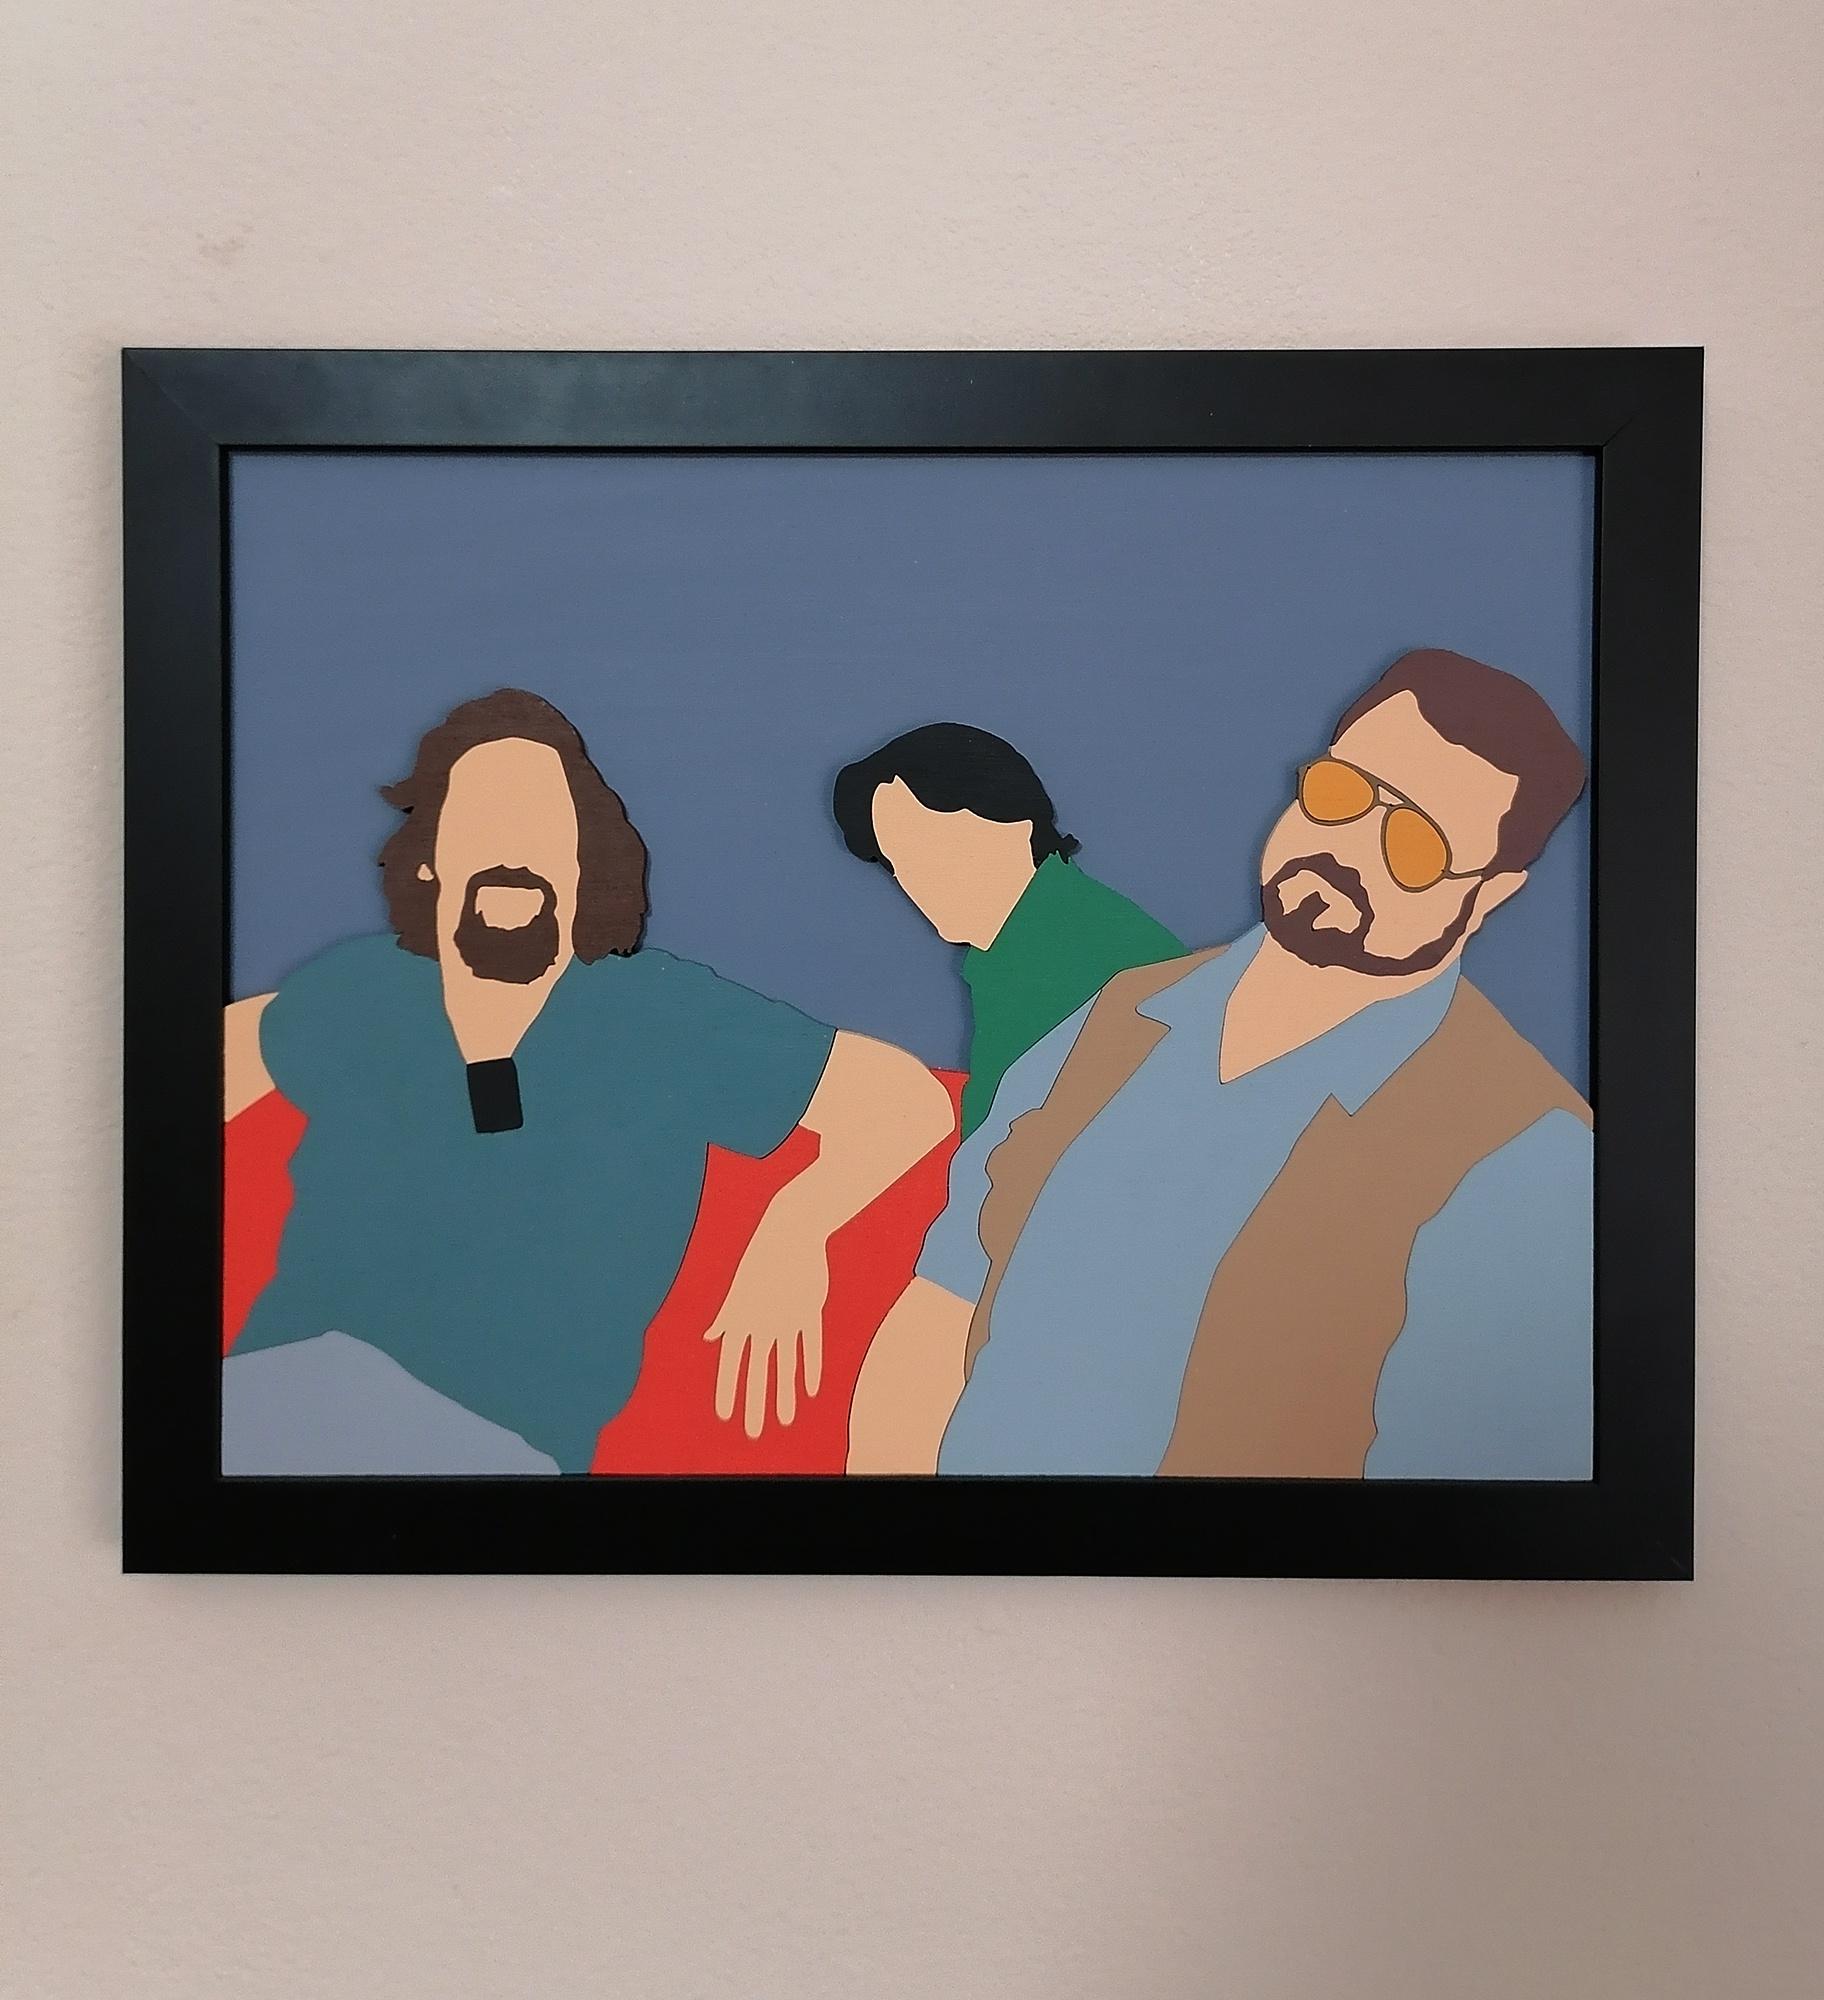 I made a Lebowski bowling scene art determine of plywood. I’m hoping you guys relish the proportion.